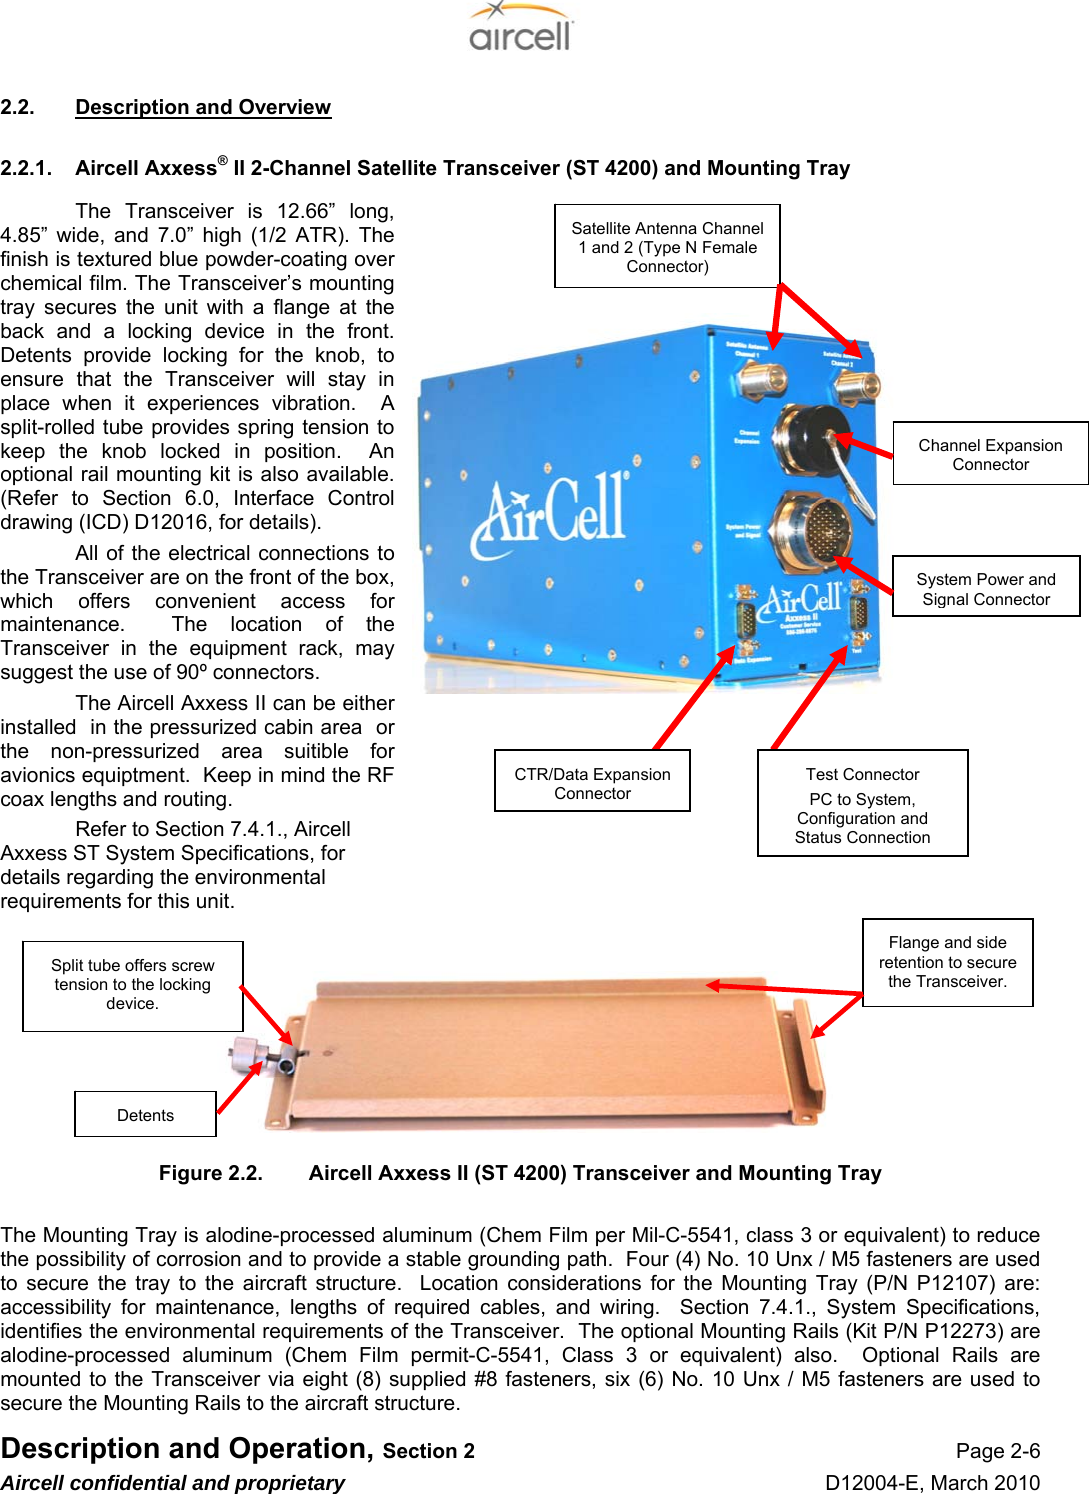  Description and Operation, Section 2 Page 2-6 Aircell confidential and proprietary D12004-E, March 2010 2.2.  Description and Overview 2.2.1.  Aircell Axxess® II 2-Channel Satellite Transceiver (ST 4200) and Mounting Tray The Transceiver is 12.66” long, 4.85” wide, and 7.0” high (1/2 ATR). The finish is textured blue powder-coating over chemical film. The Transceiver’s mounting tray secures the unit with a flange at the back and a locking device in the front. Detents provide locking for the knob, to ensure that the Transceiver will stay in place when it experiences vibration.  A split-rolled tube provides spring tension to keep the knob locked in position.  An optional rail mounting kit is also available. (Refer to Section 6.0, Interface Control drawing (ICD) D12016, for details). All of the electrical connections to the Transceiver are on the front of the box, which offers convenient access for maintenance.  The location of the Transceiver in the equipment rack, may suggest the use of 90º connectors. The Aircell Axxess II can be either installed  in the pressurized cabin area  or the non-pressurized area suitible for avionics equiptment.  Keep in mind the RF coax lengths and routing. Refer to Section 7.4.1., Aircell Axxess ST System Specifications, for details regarding the environmental requirements for this unit.         Figure 2.2.  Aircell Axxess II (ST 4200) Transceiver and Mounting Tray  The Mounting Tray is alodine-processed aluminum (Chem Film per Mil-C-5541, class 3 or equivalent) to reduce the possibility of corrosion and to provide a stable grounding path.  Four (4) No. 10 Unx / M5 fasteners are used to secure the tray to the aircraft structure.  Location considerations for the Mounting Tray (P/N P12107) are: accessibility for maintenance, lengths of required cables, and wiring.  Section 7.4.1., System Specifications, identifies the environmental requirements of the Transceiver.  The optional Mounting Rails (Kit P/N P12273) are alodine-processed aluminum (Chem Film permit-C-5541, Class 3 or equivalent) also.  Optional Rails are mounted to the Transceiver via eight (8) supplied #8 fasteners, six (6) No. 10 Unx / M5 fasteners are used to secure the Mounting Rails to the aircraft structure. Flange and side retention to secure the Transceiver. Split tube offers screw tension to the locking device. Detents System Power and Signal Connector Satellite Antenna Channel 1 and 2 (Type N Female Connector) Channel Expansion Connector CTR/Data Expansion ConnectorTest Connector PC to System, Configuration and Status Connection 